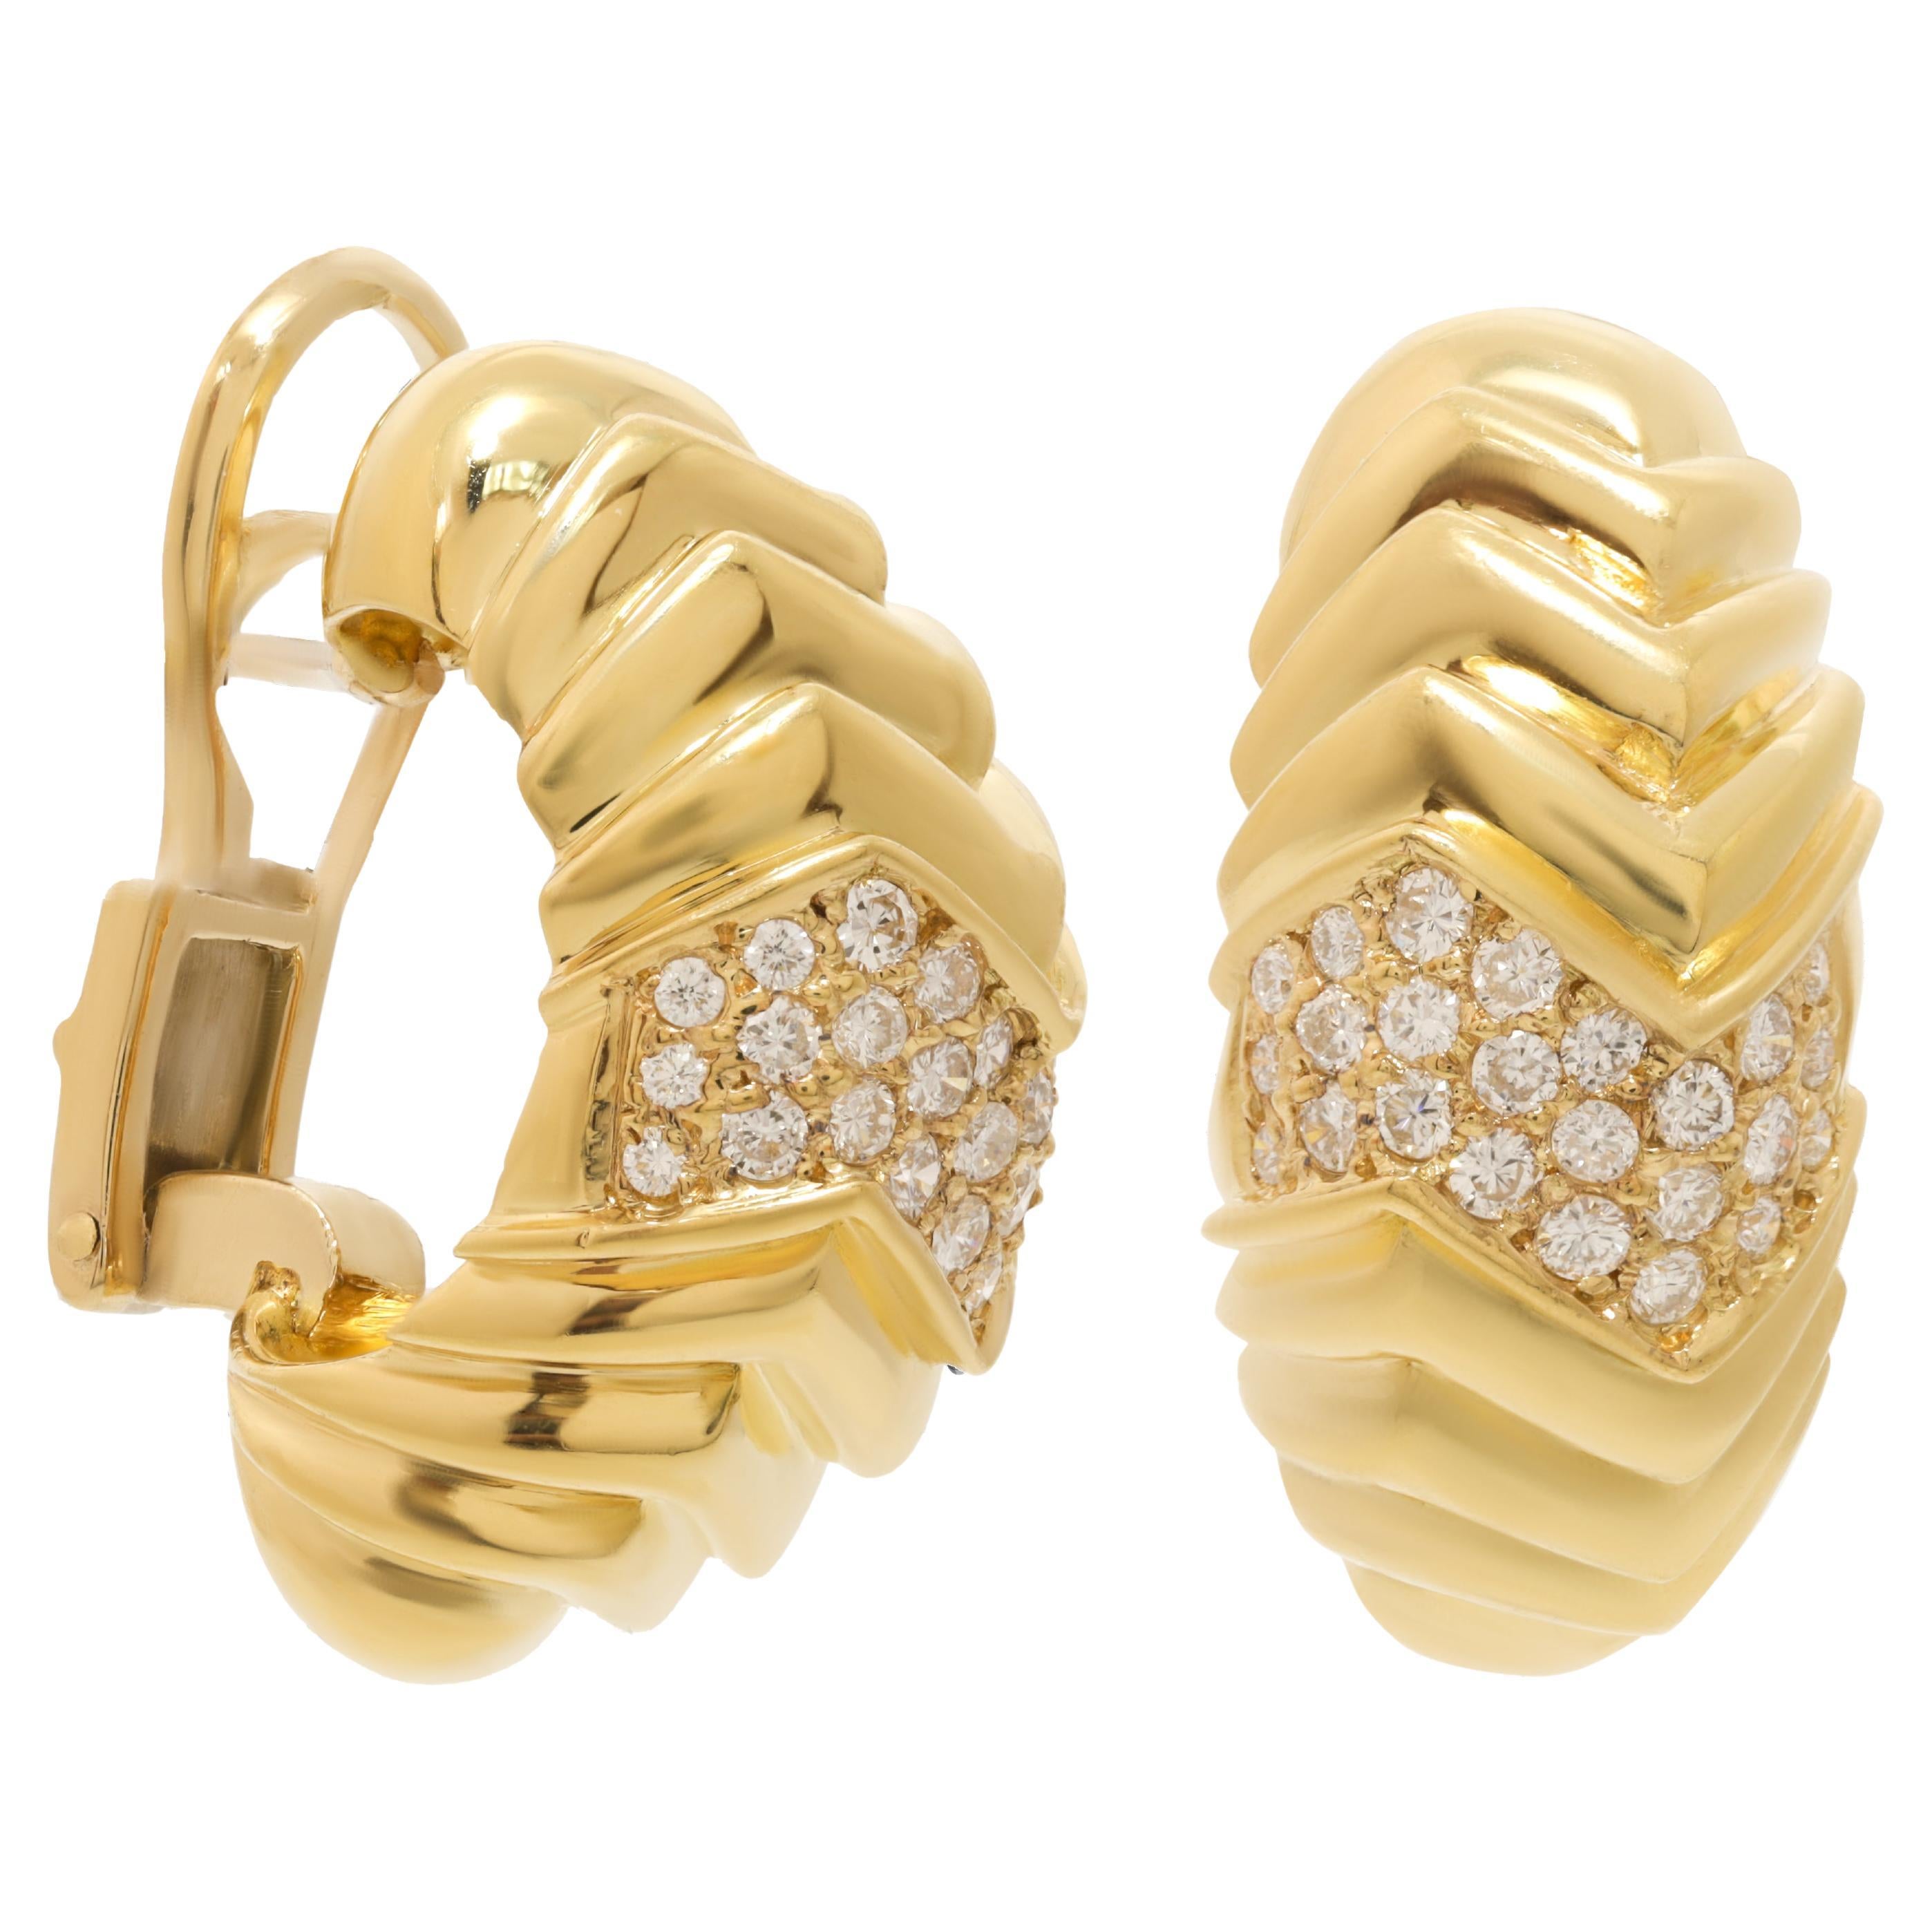 Diana M.18 kt yellow gold diamond earrings adorned with 1.50 cts tw of diamonds 